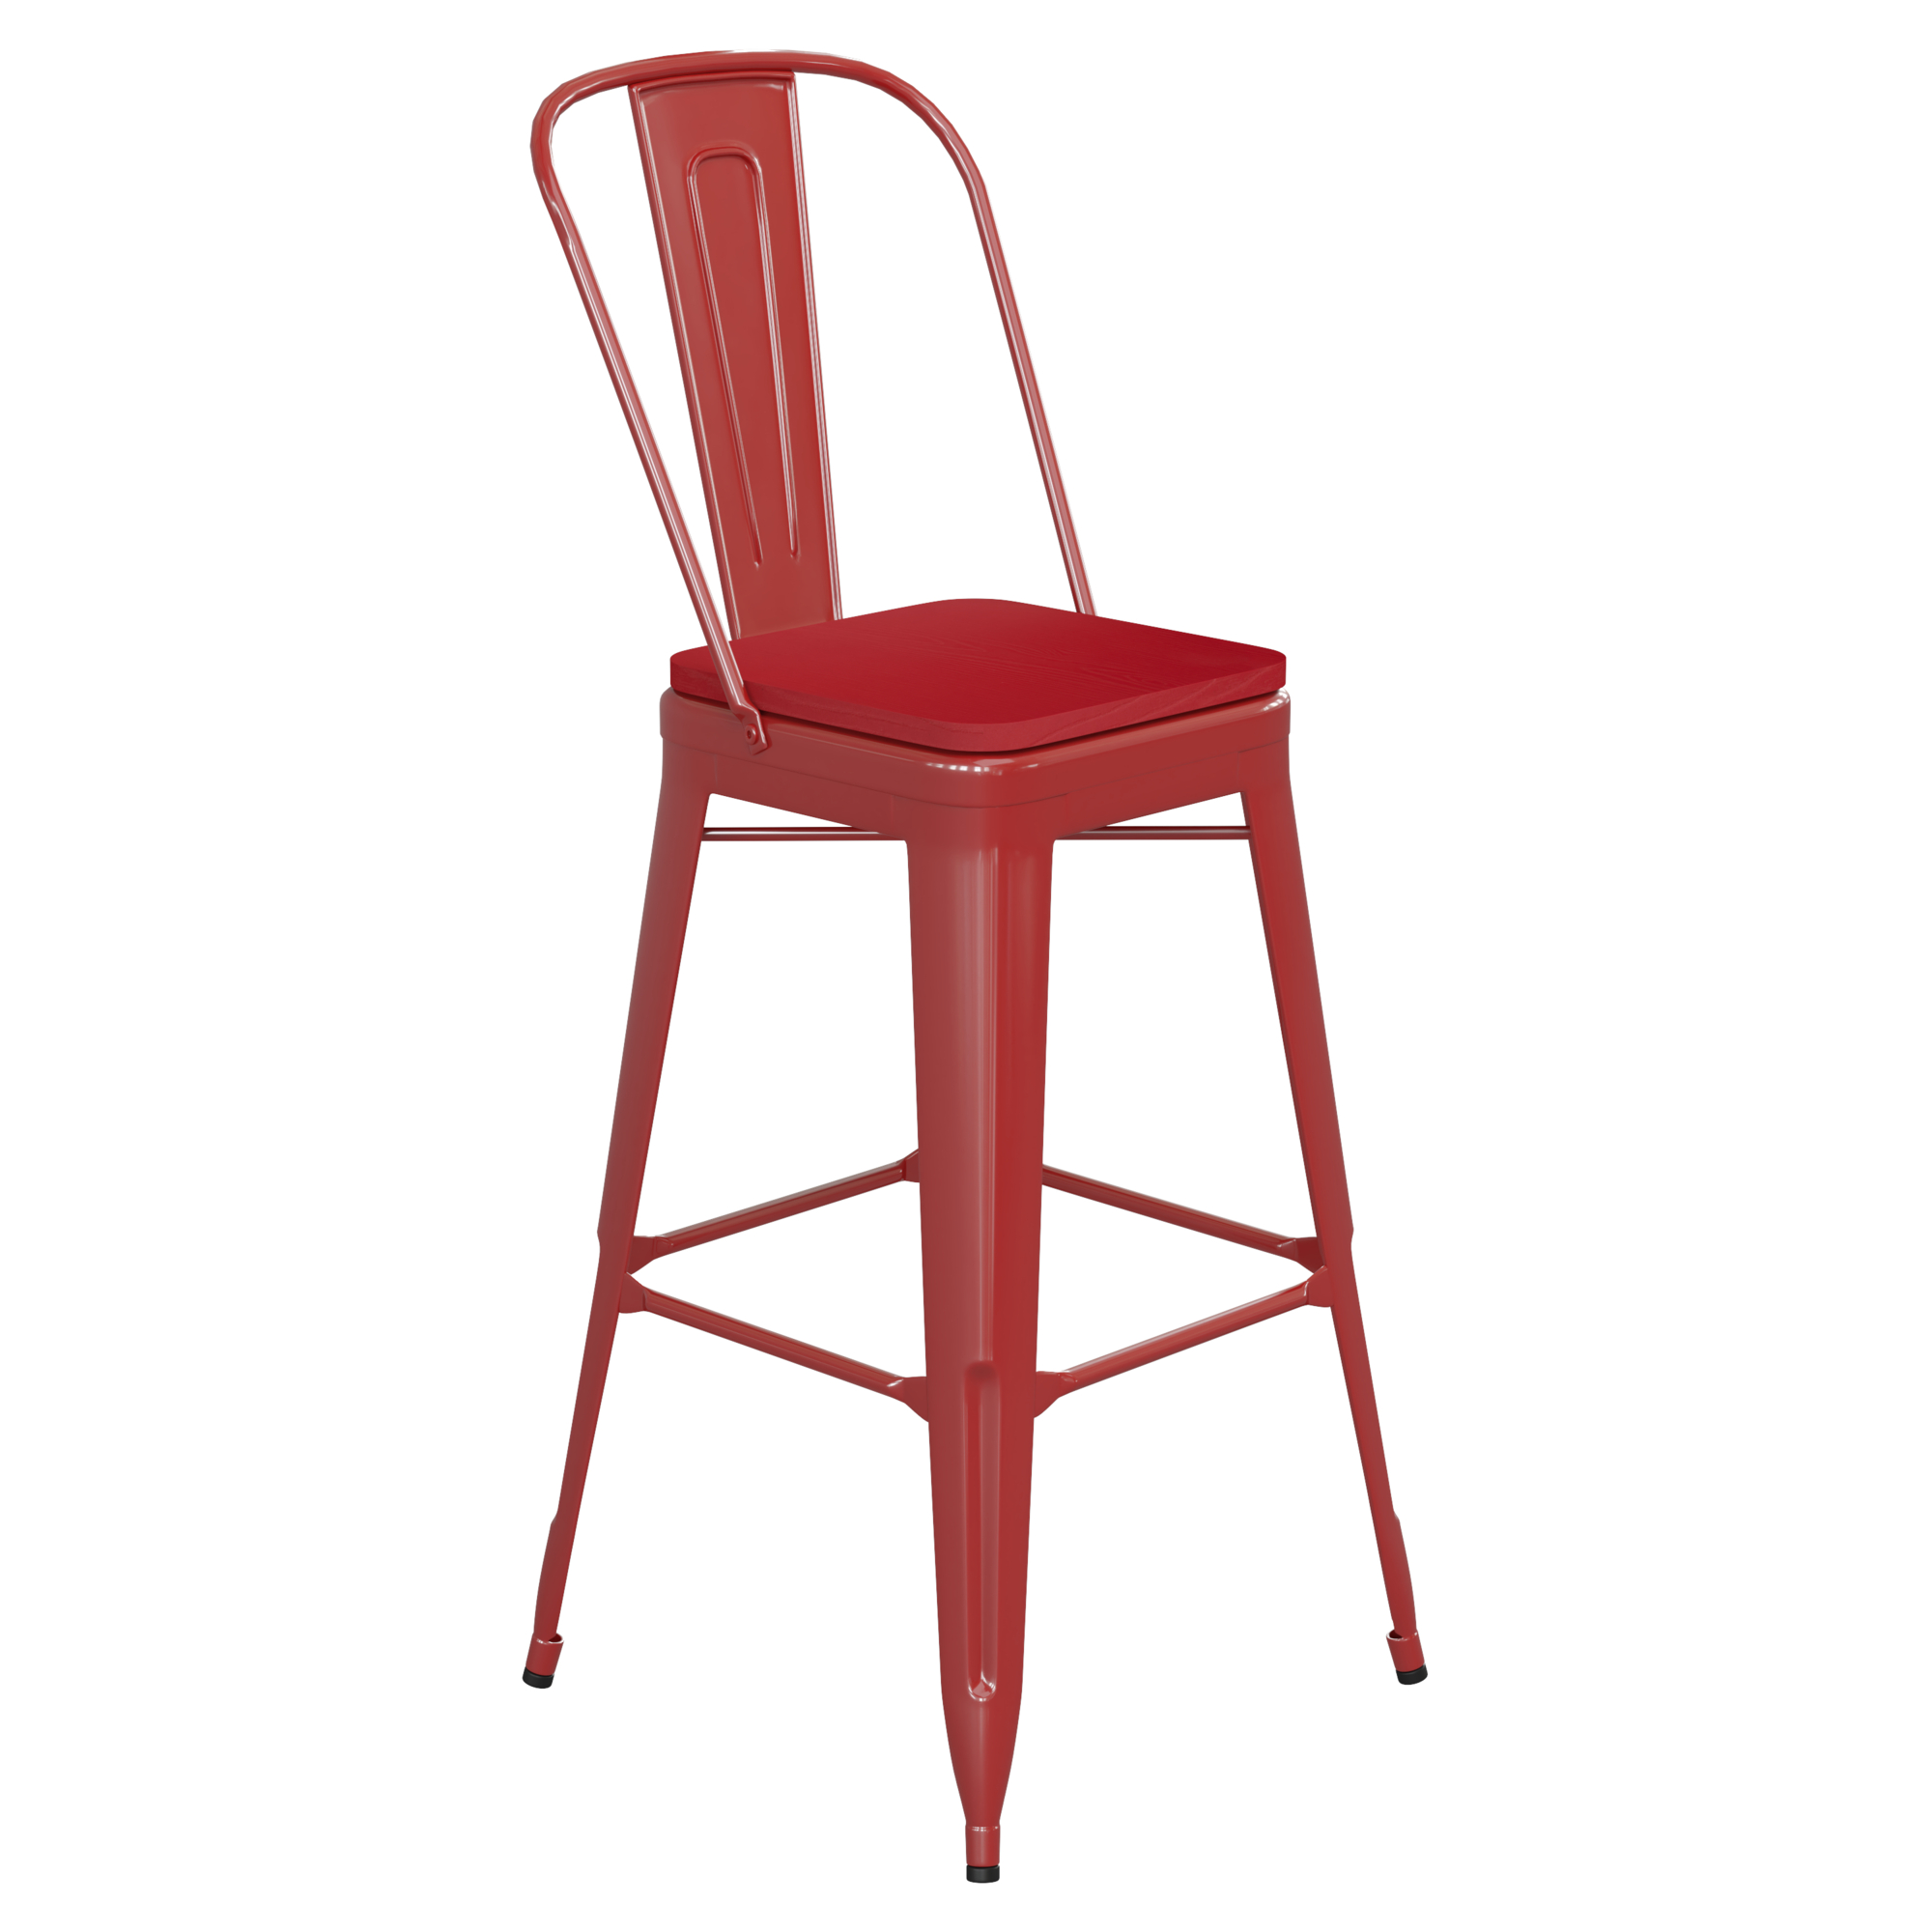 Flash Furniture, 30Inch Red Metal Counter Stool-Red Poly Seat, Primary Color Red, Included (qty.) 1, Model CH3132030GBRP2R